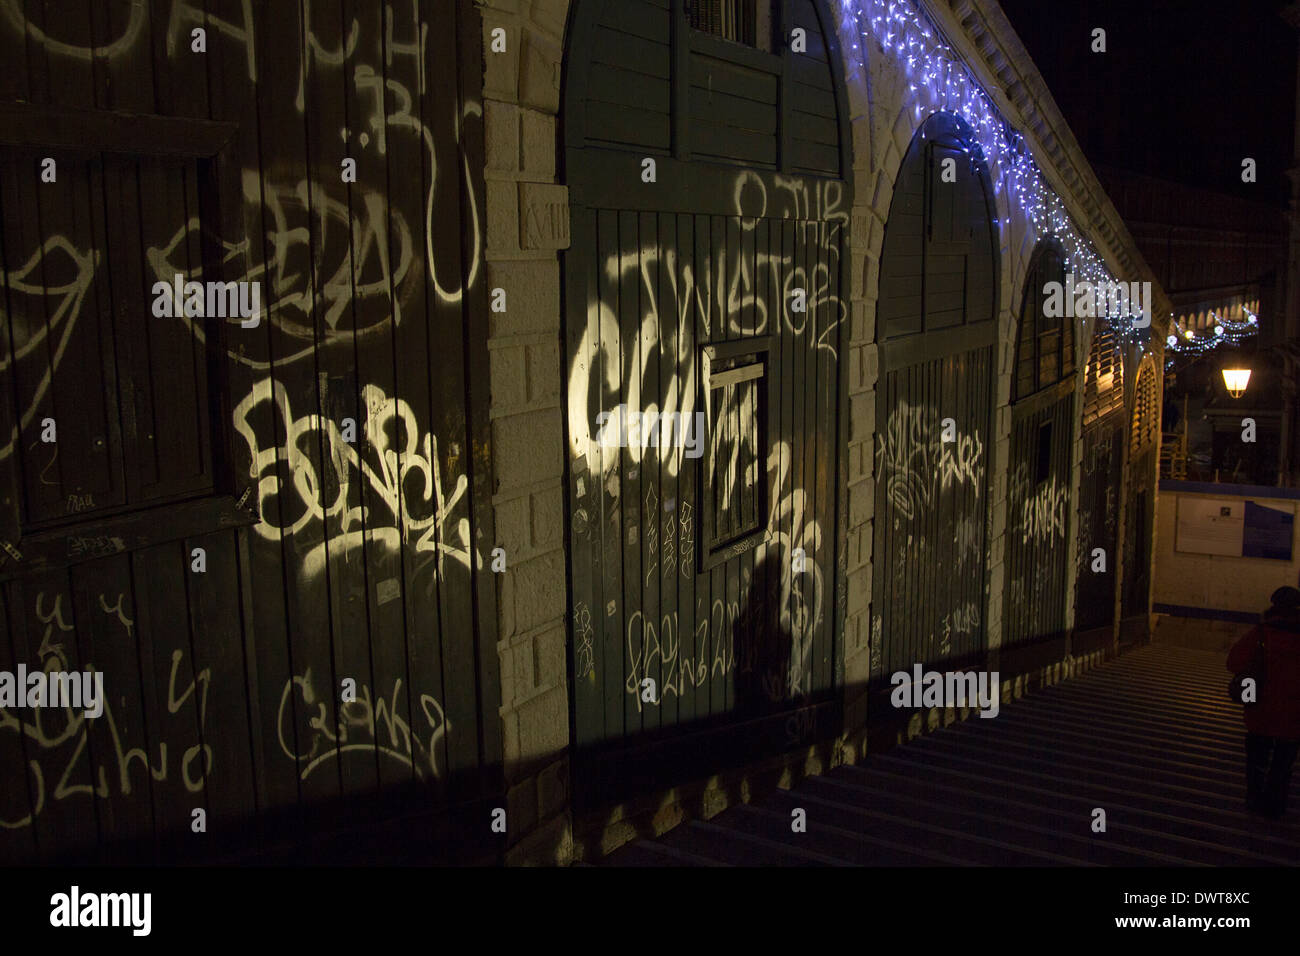 Graffiti Covered Bridge High Resolution Stock Photography And Images Alamy